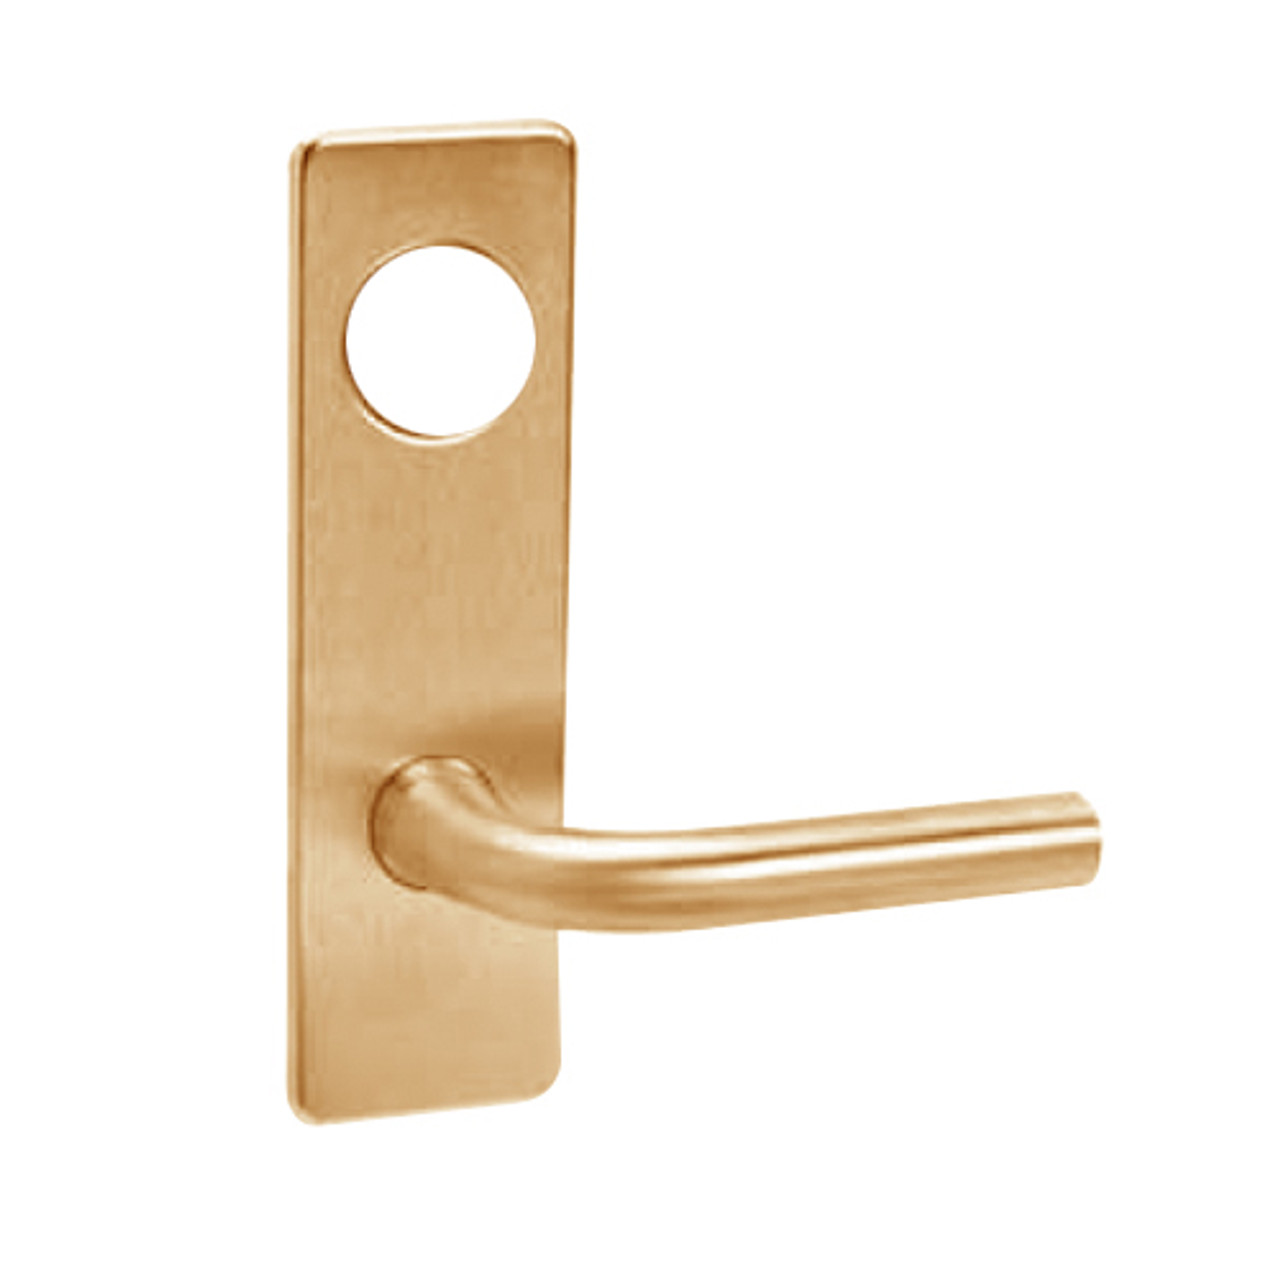 ML2032-RSM-612-CL6 Corbin Russwin ML2000 Series IC 6-Pin Less Core Mortise Institution Locksets with Regis Lever in Satin Bronze